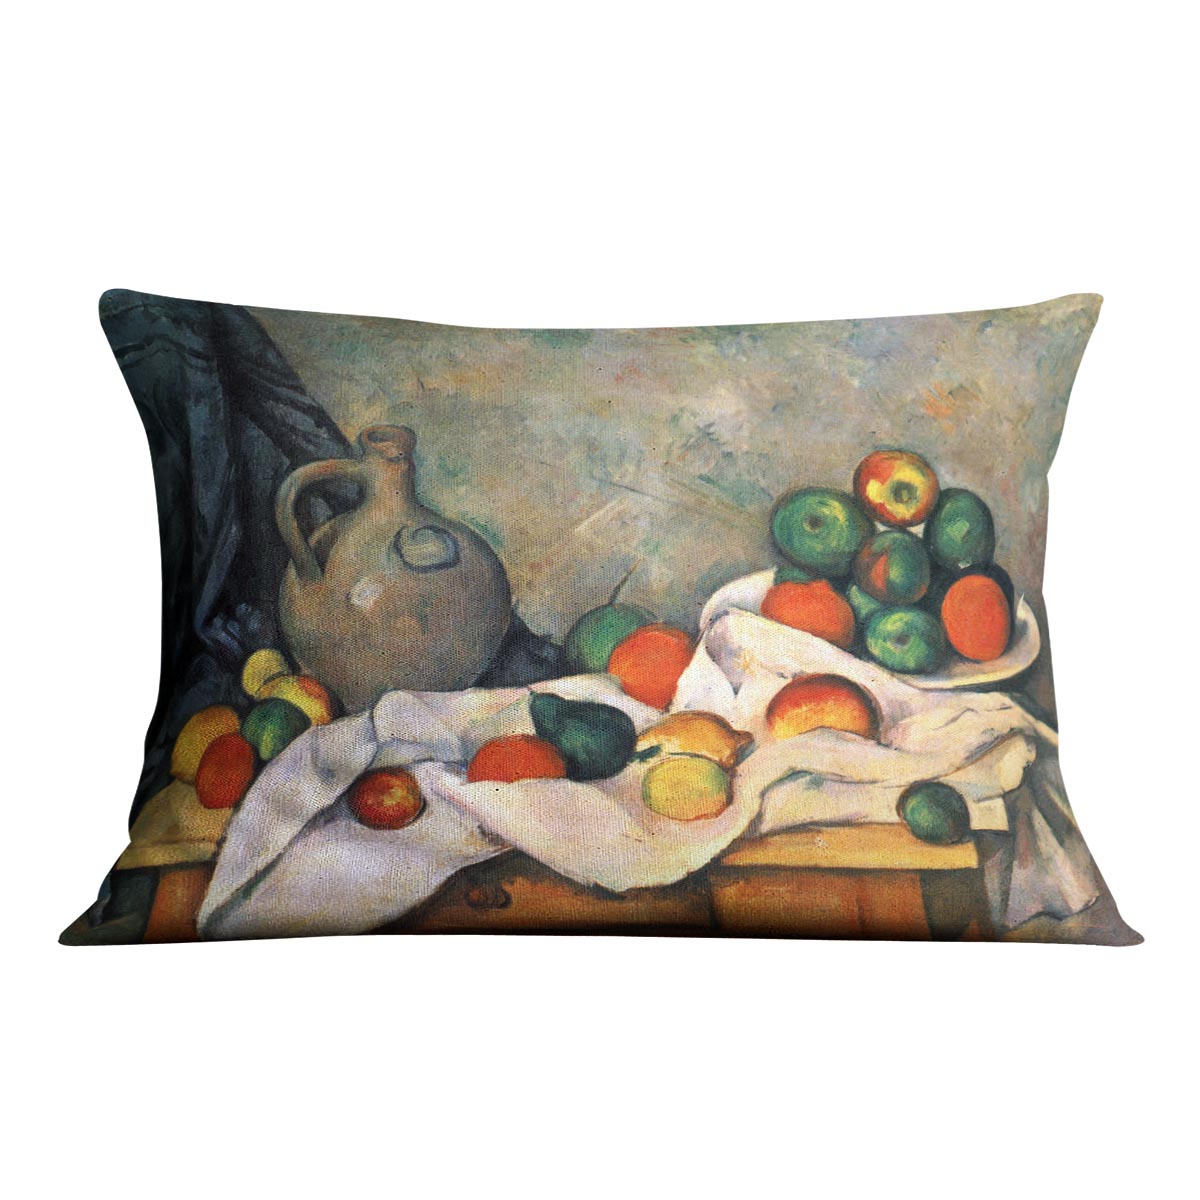 Still life drapery pitcher and fruit bowl by Cezanne Cushion